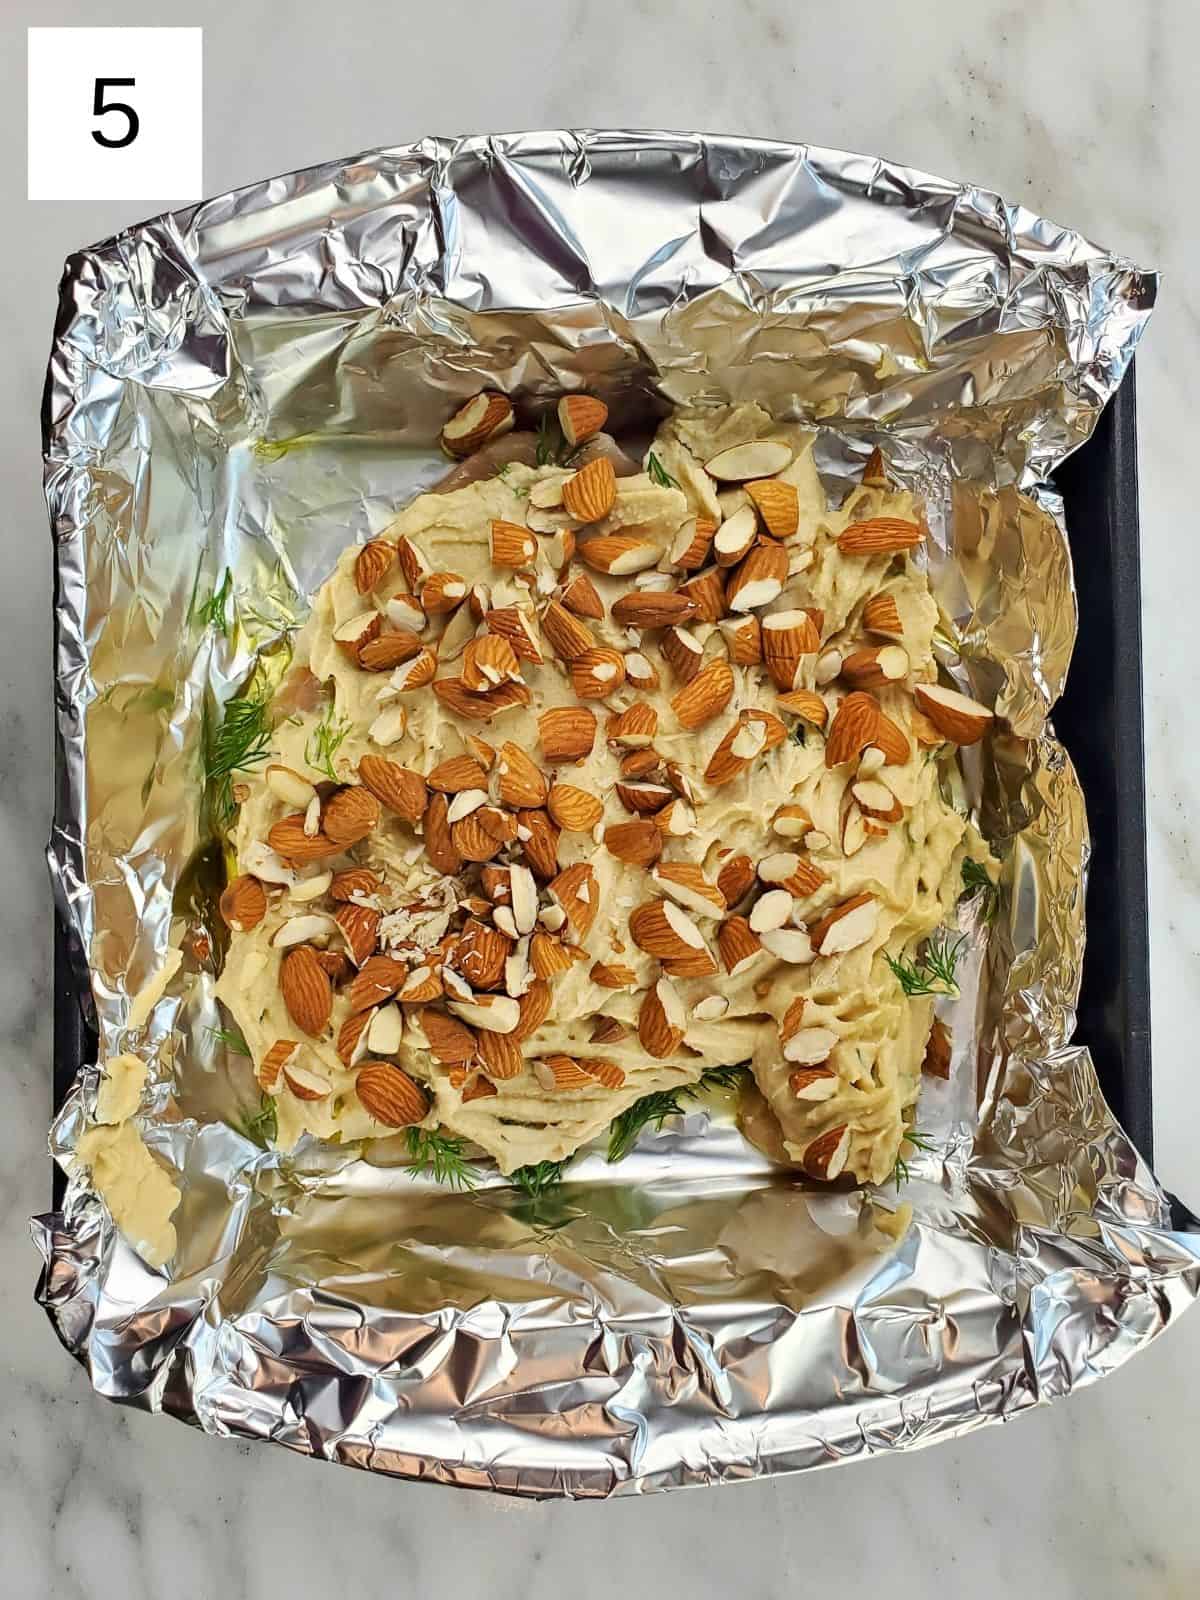 seasoned chicken tenders, topped with hummus and almonds, arranged on a foil-lined baking tray.